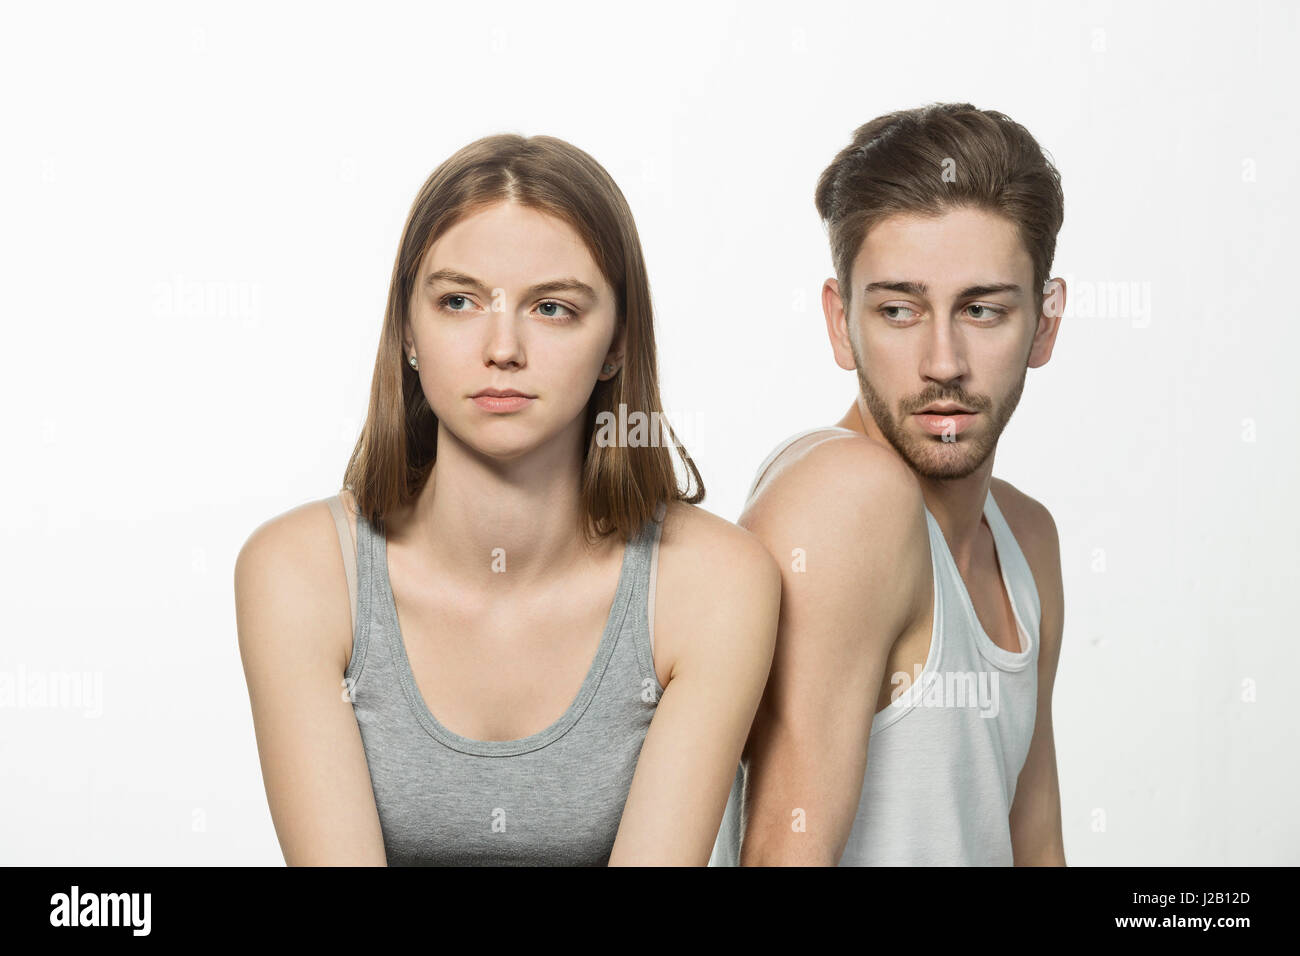 Man looking at upset woman against white background Stock Photo